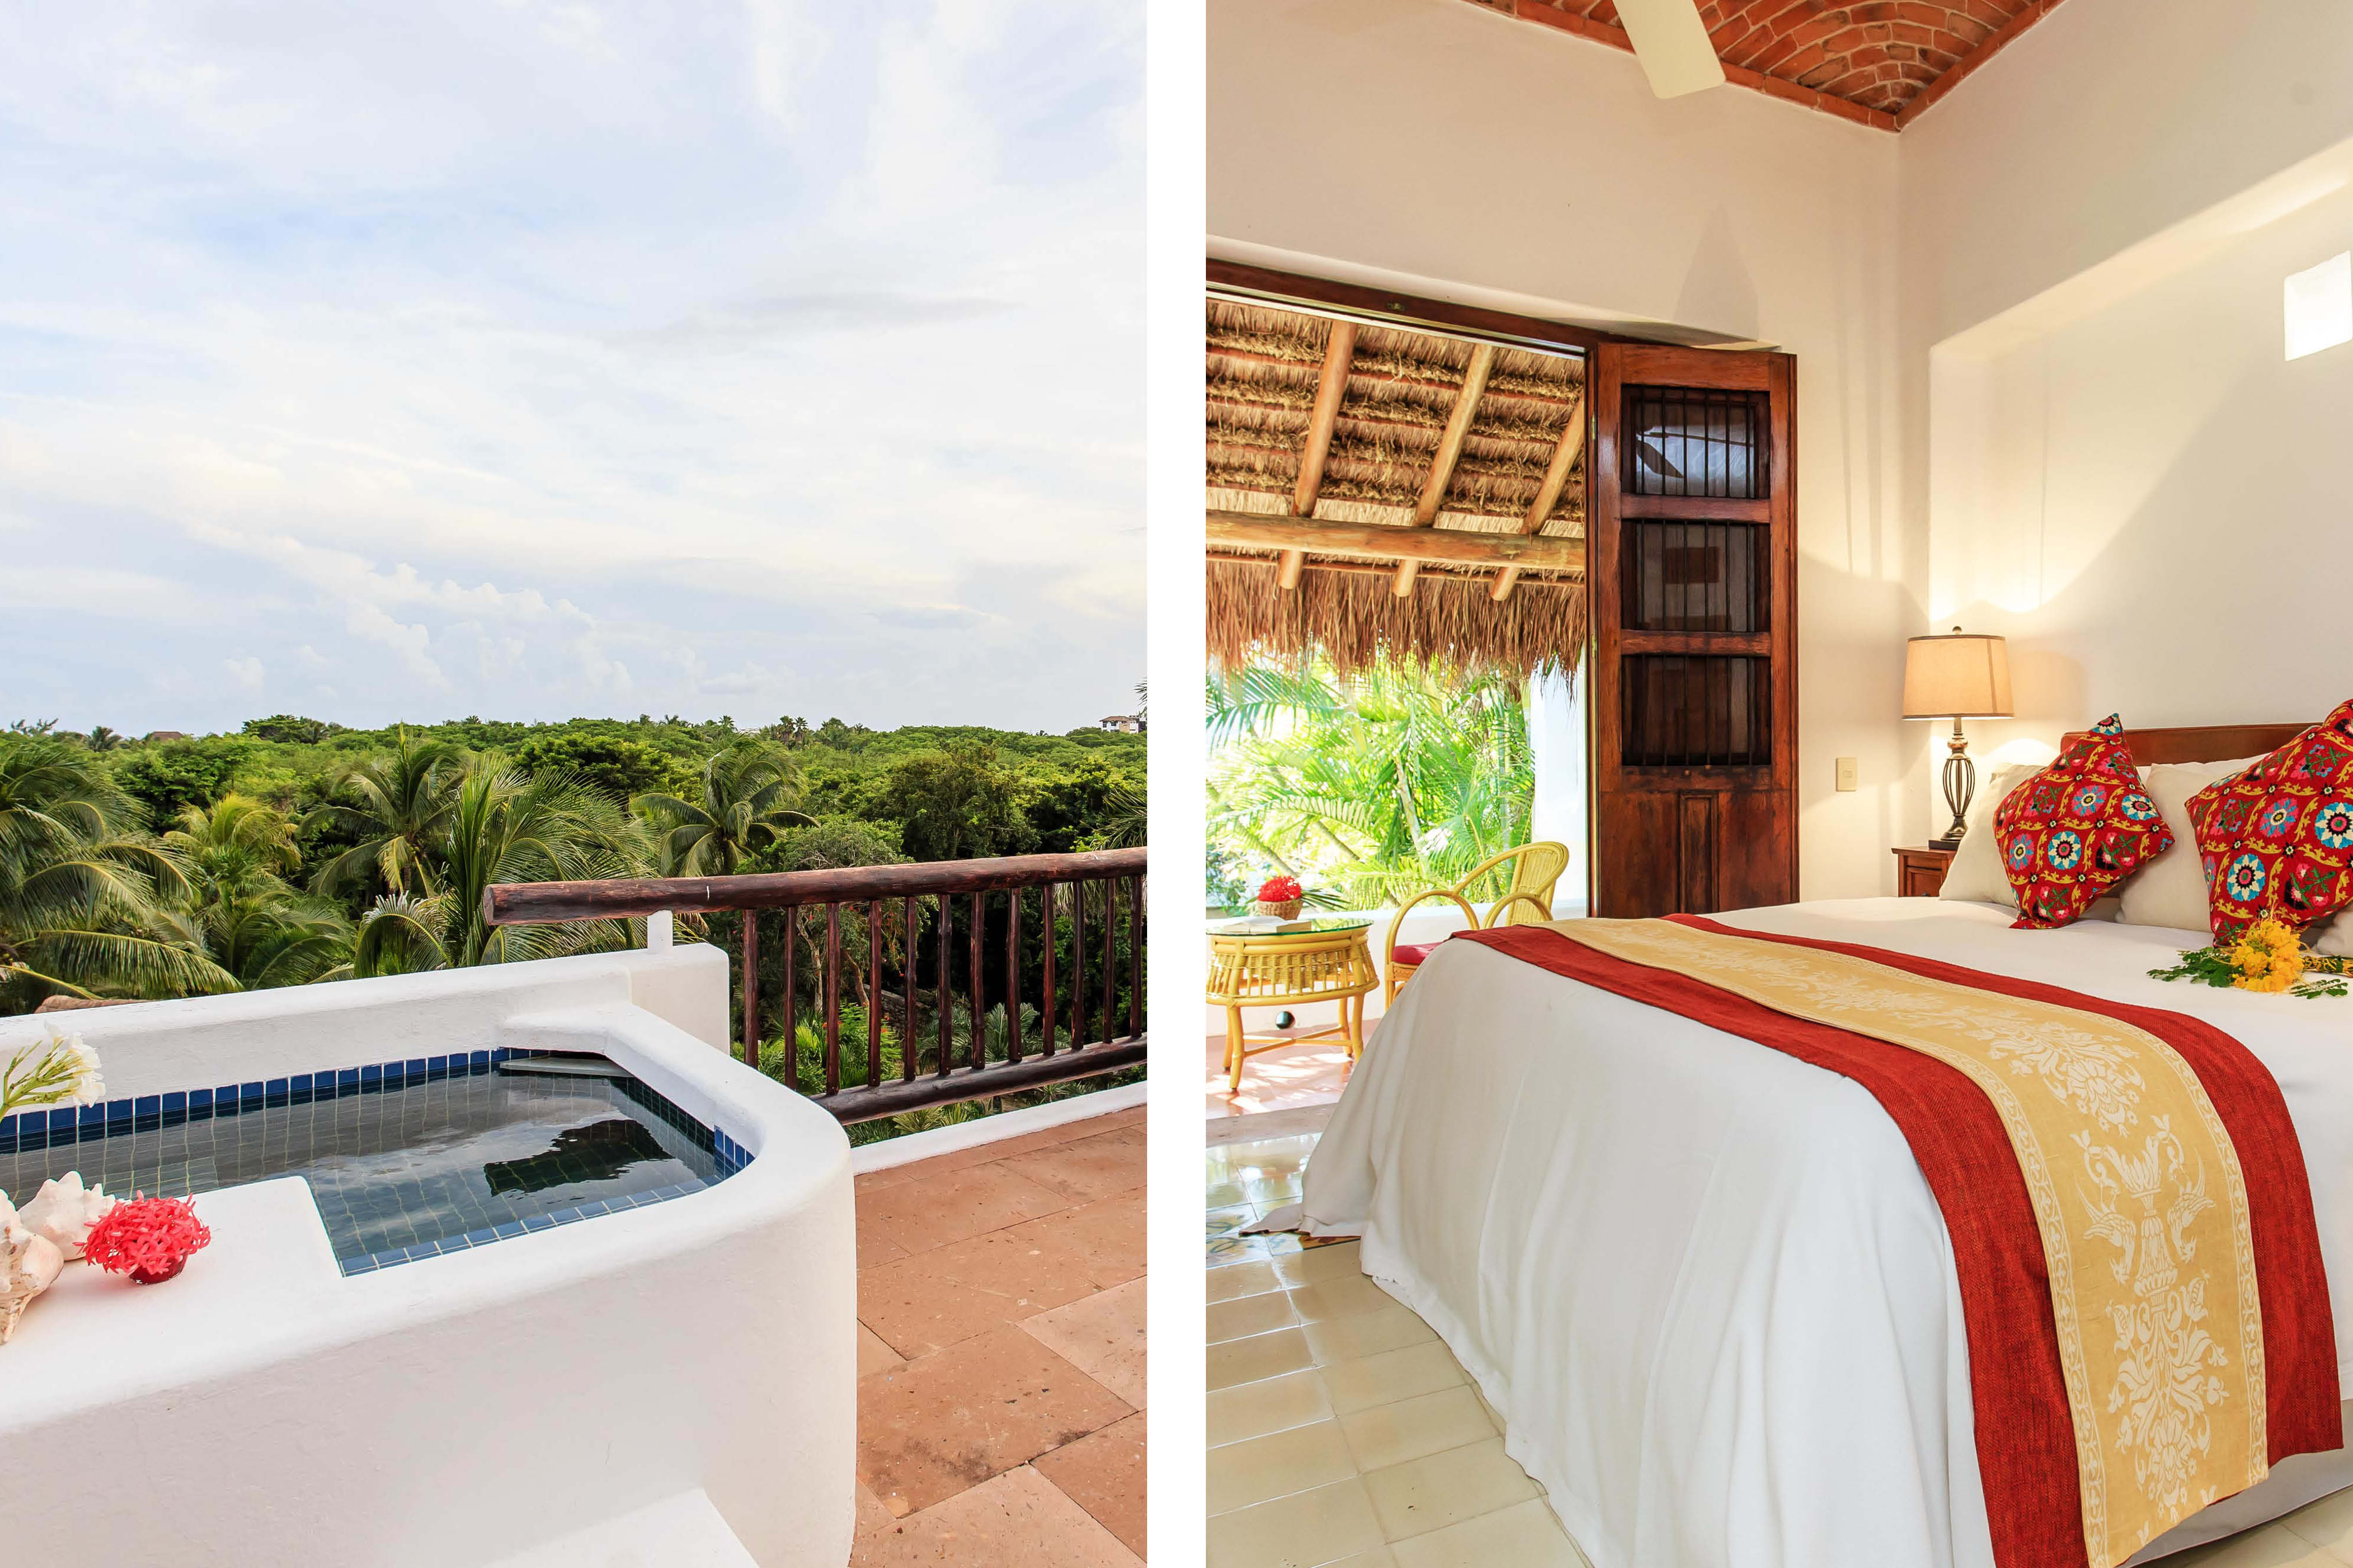 The best villas for group holidays | Yum Ha, Mexico | Mr & Mrs Smith Editorial 